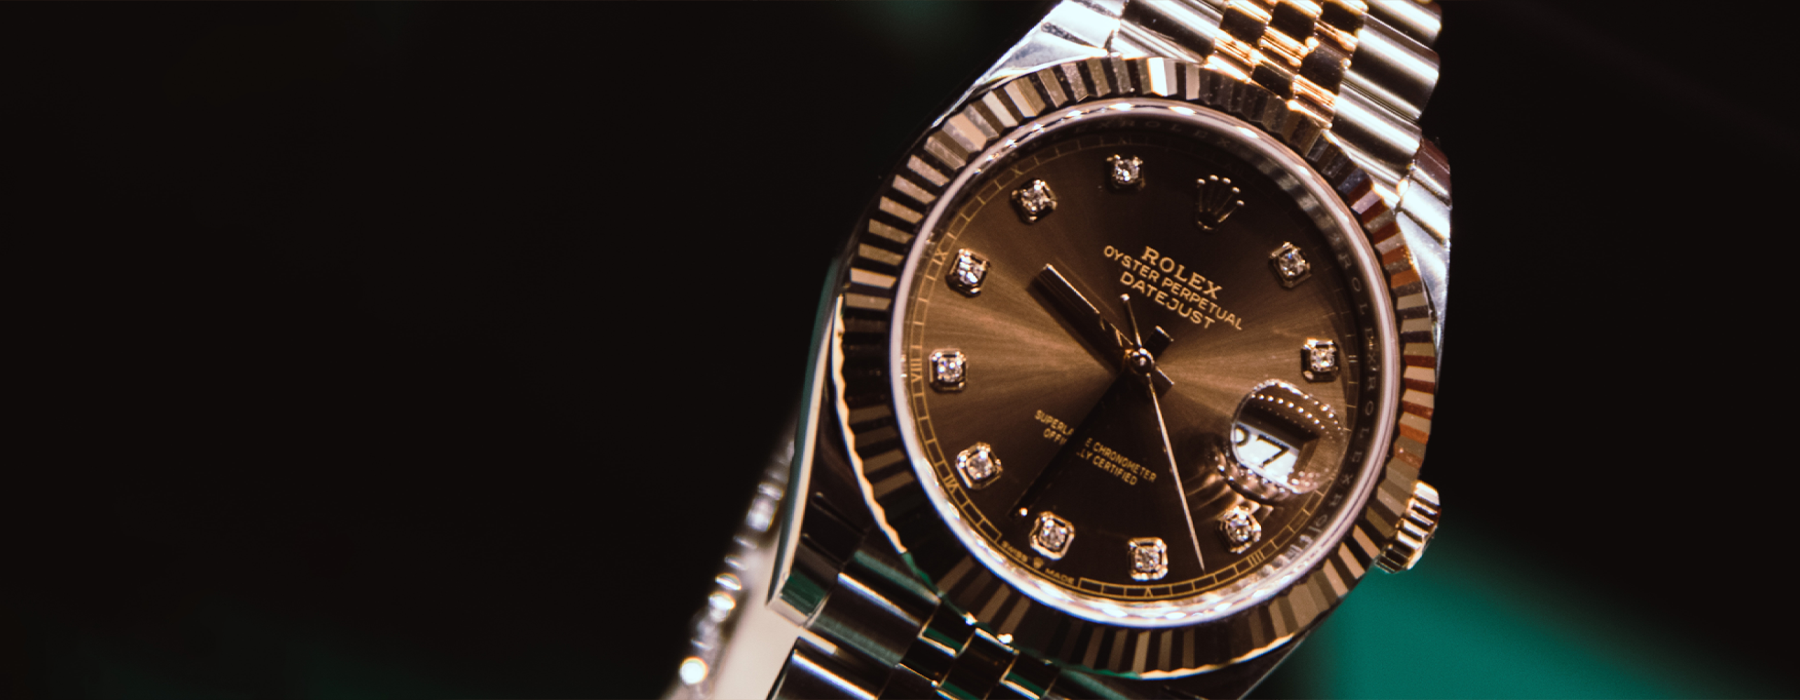 Our Pre-Owned Rolex Watches | Rollands Jewelers Libertyville, IL